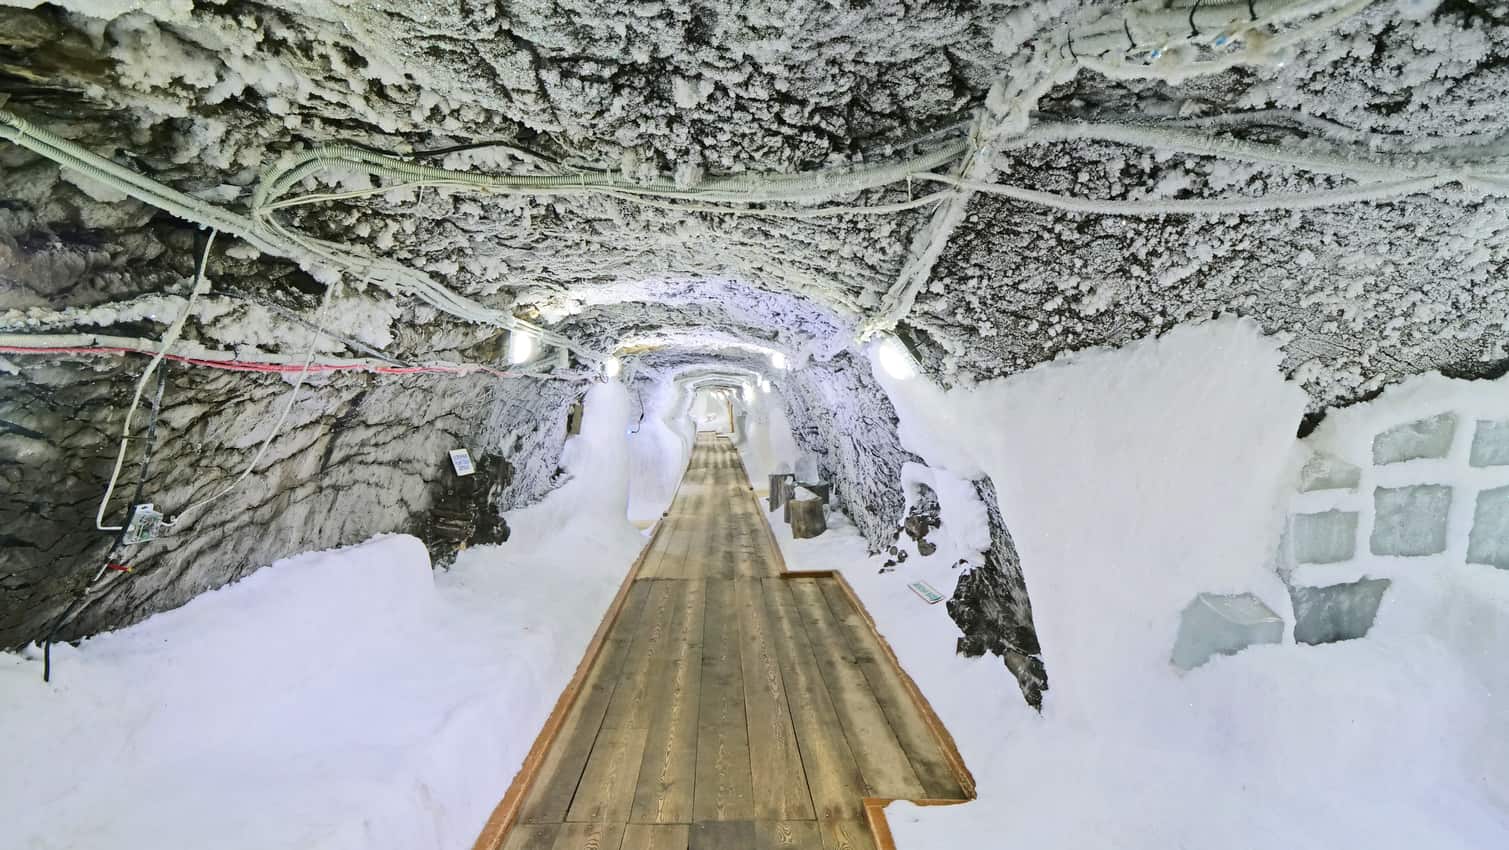 the 50,000 year old Permafrost tunnel in Igarka